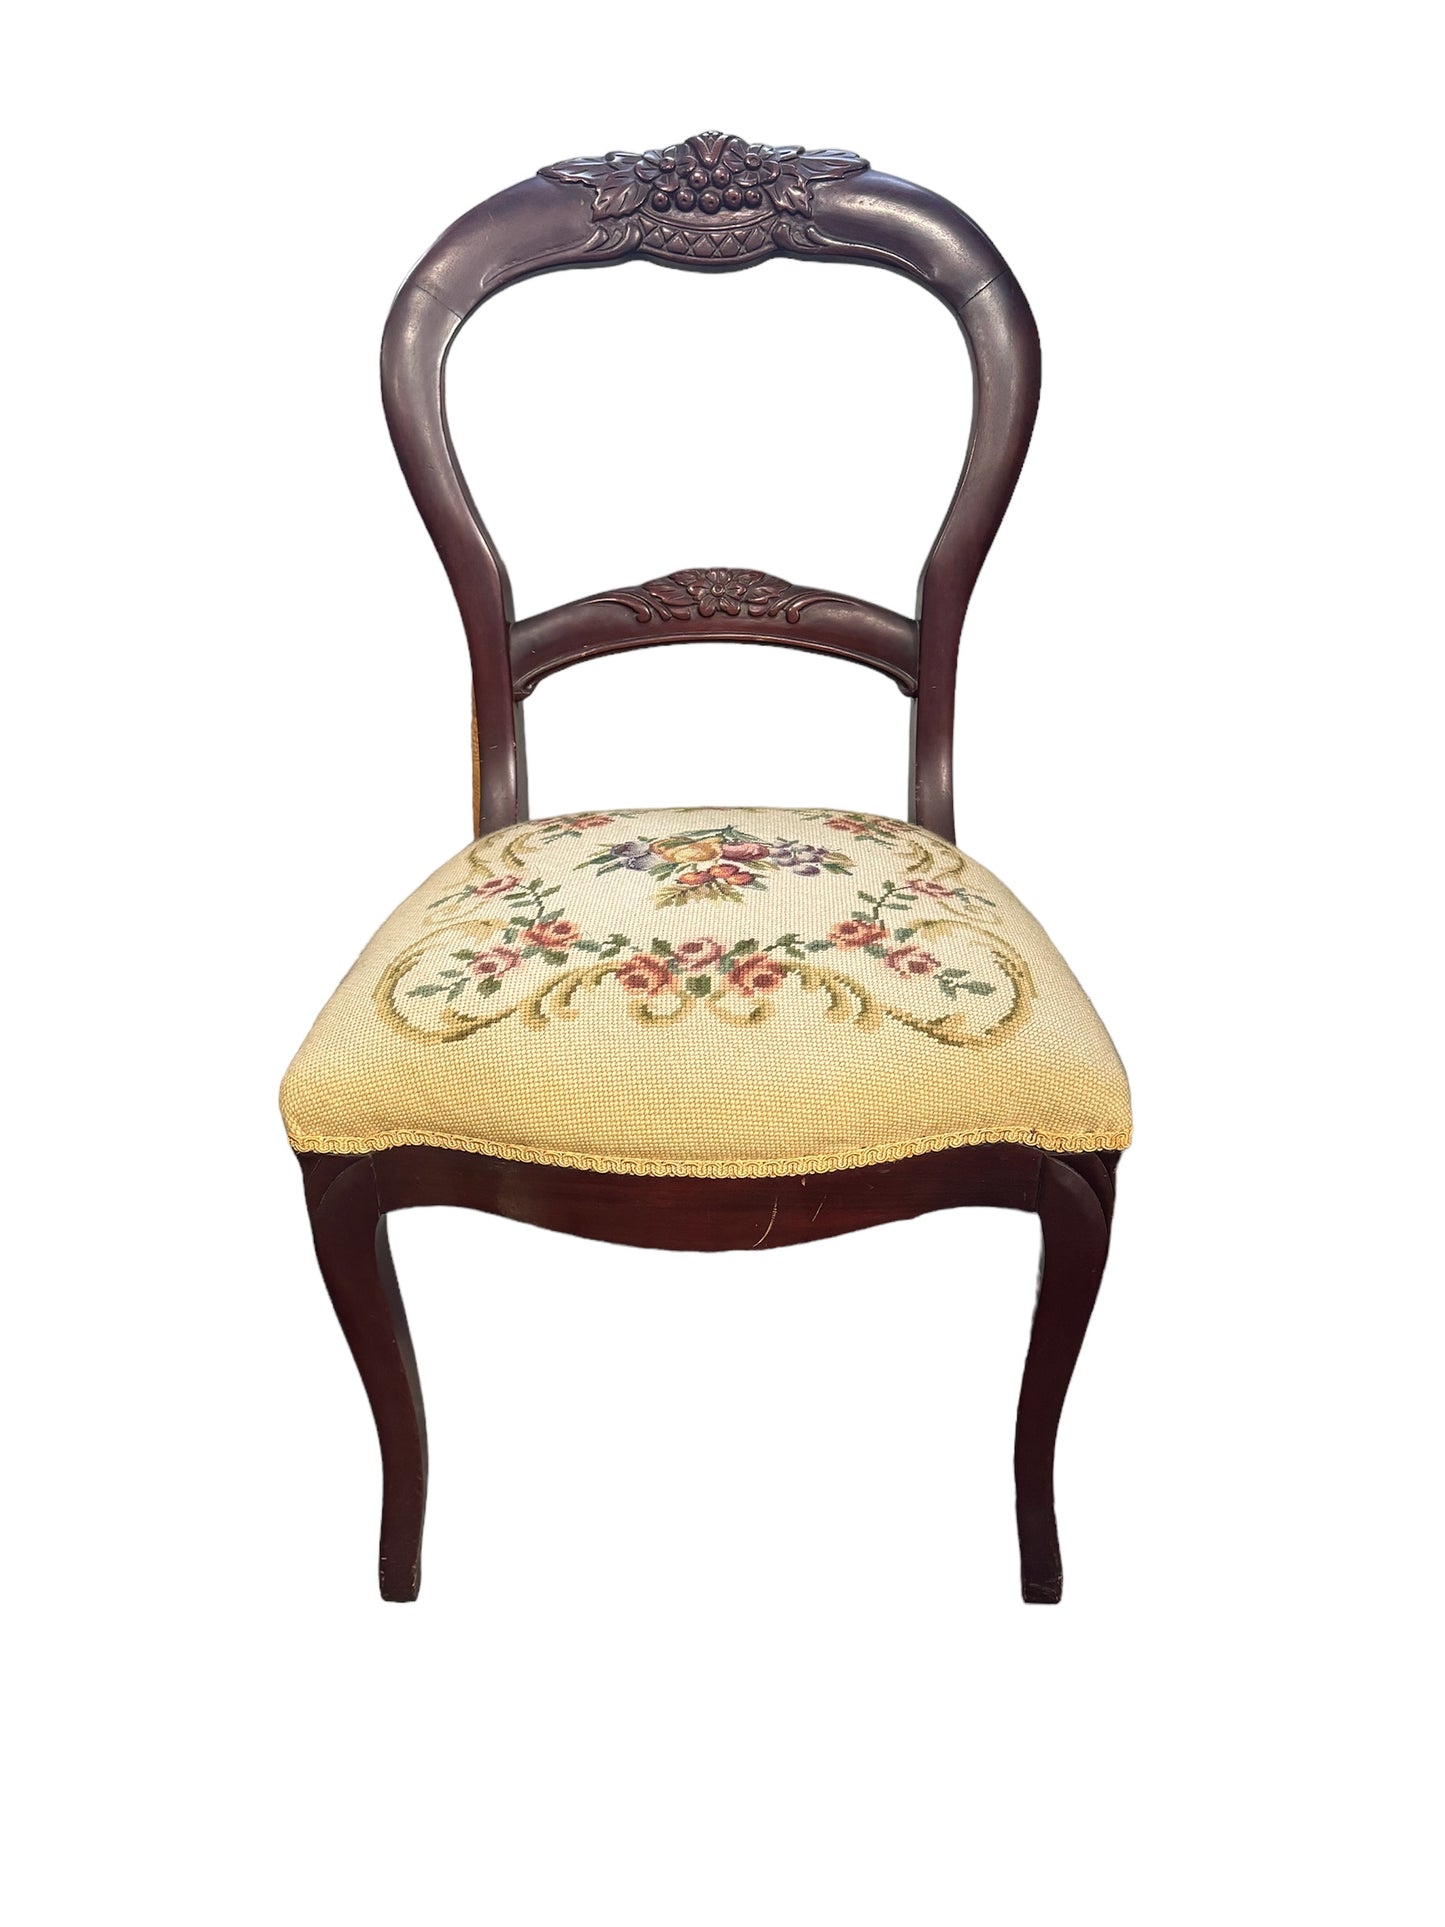 Carved Rosewood Chair Needlework Upholstered Seat